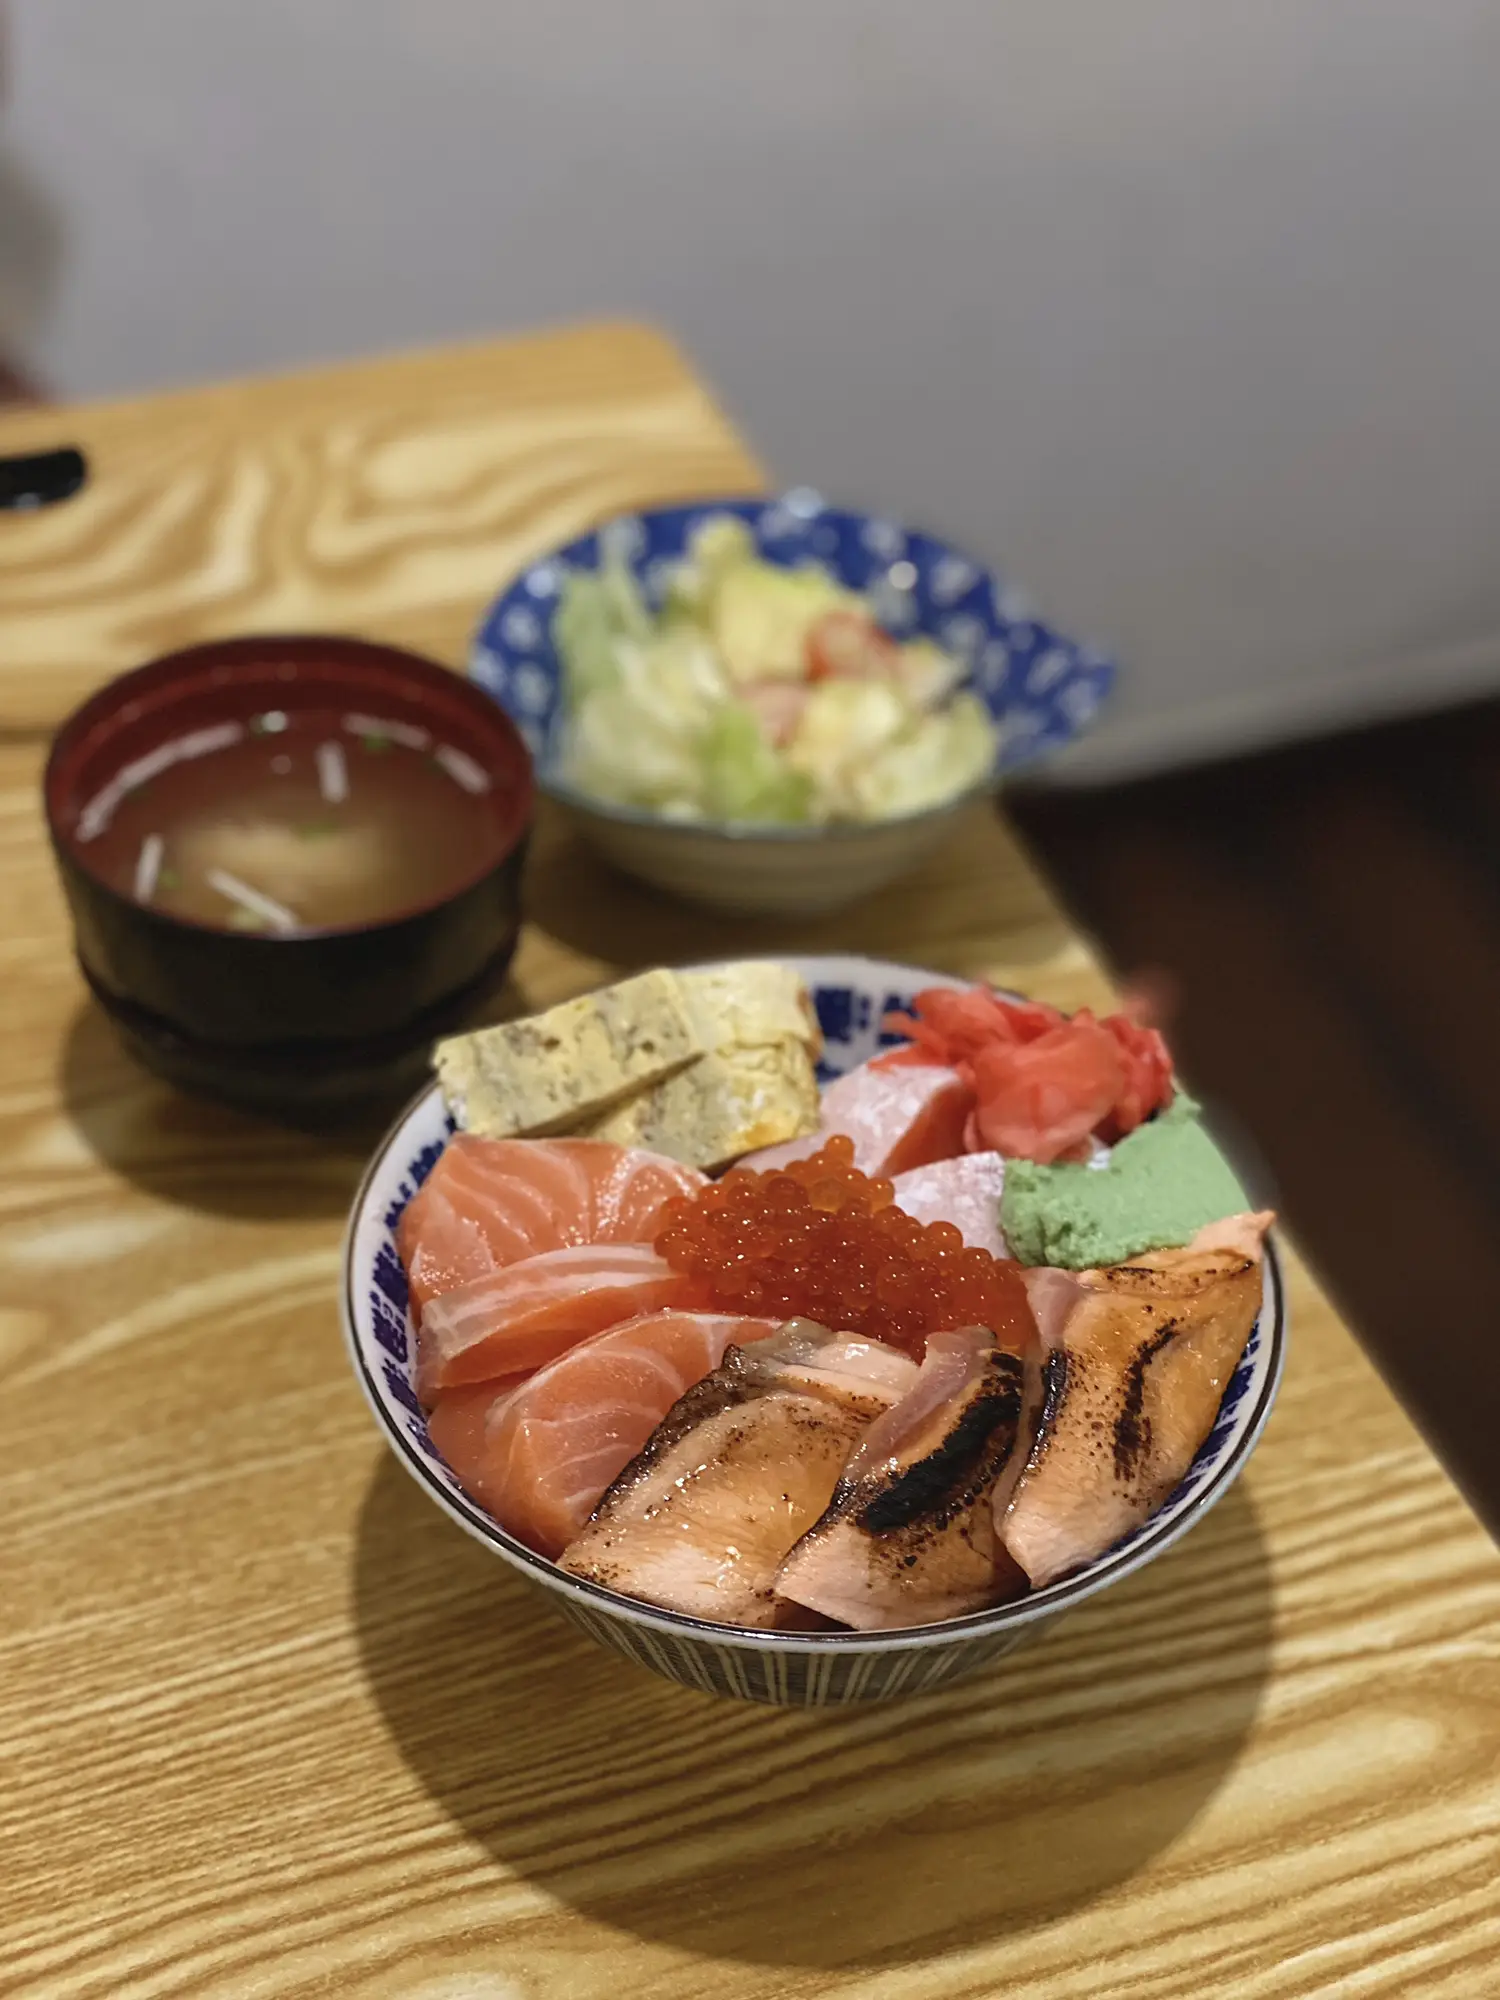 Small & Humble Japanese Food Tucked in the West's images(1)